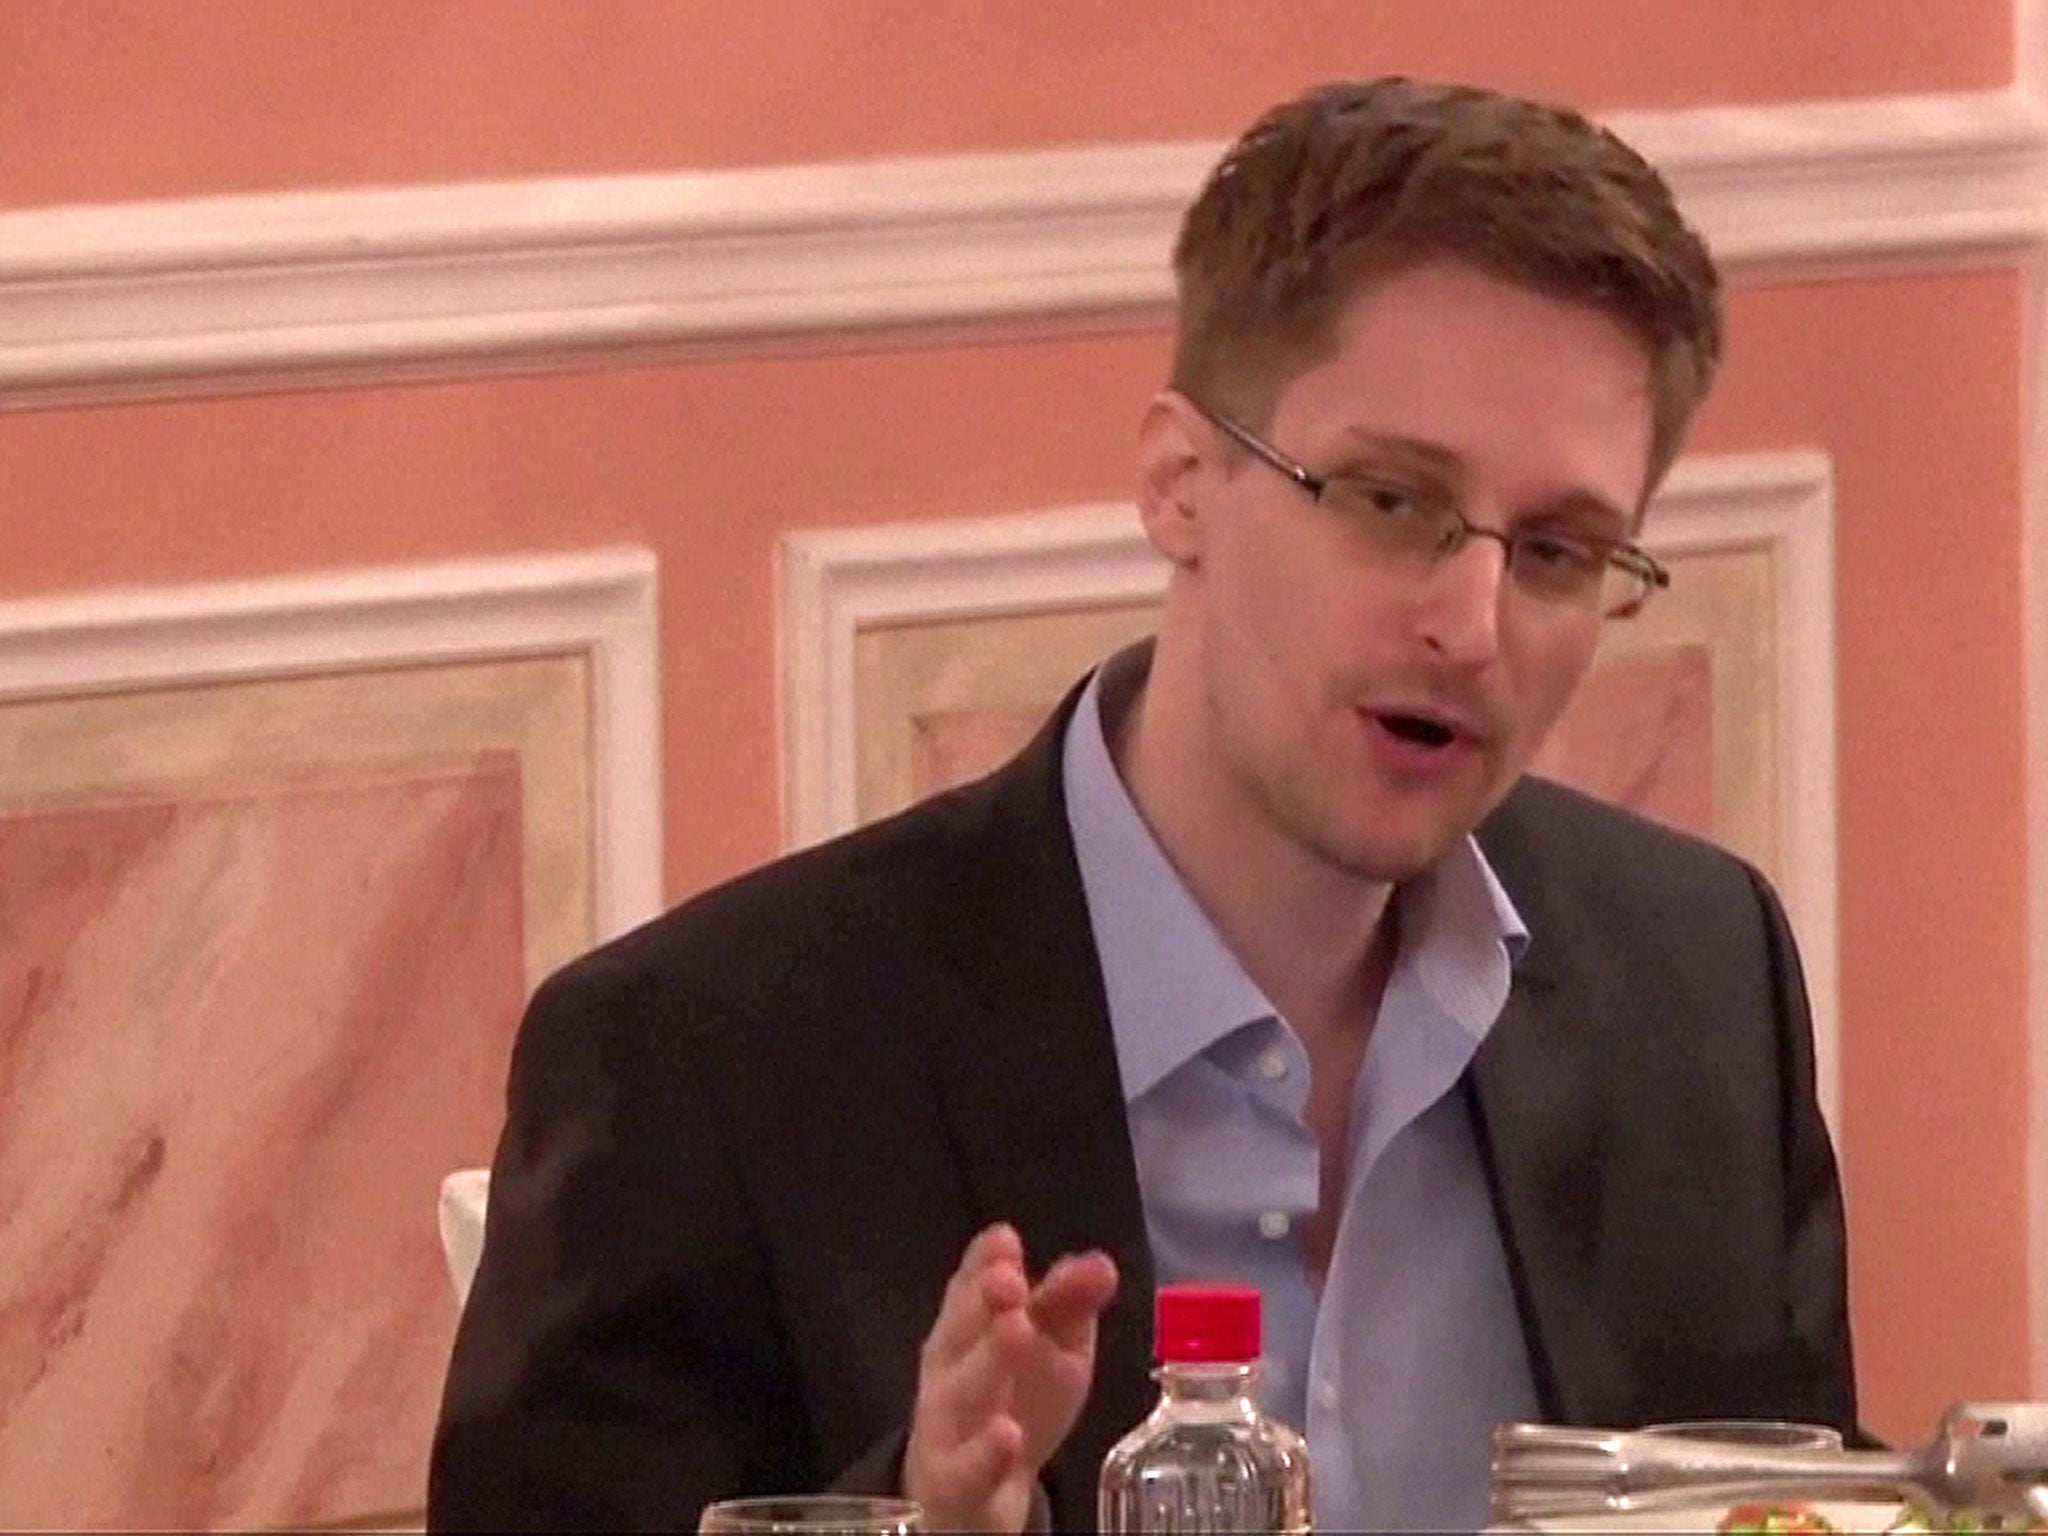 Becoming an “international fugitive” was worth it, says Snowden